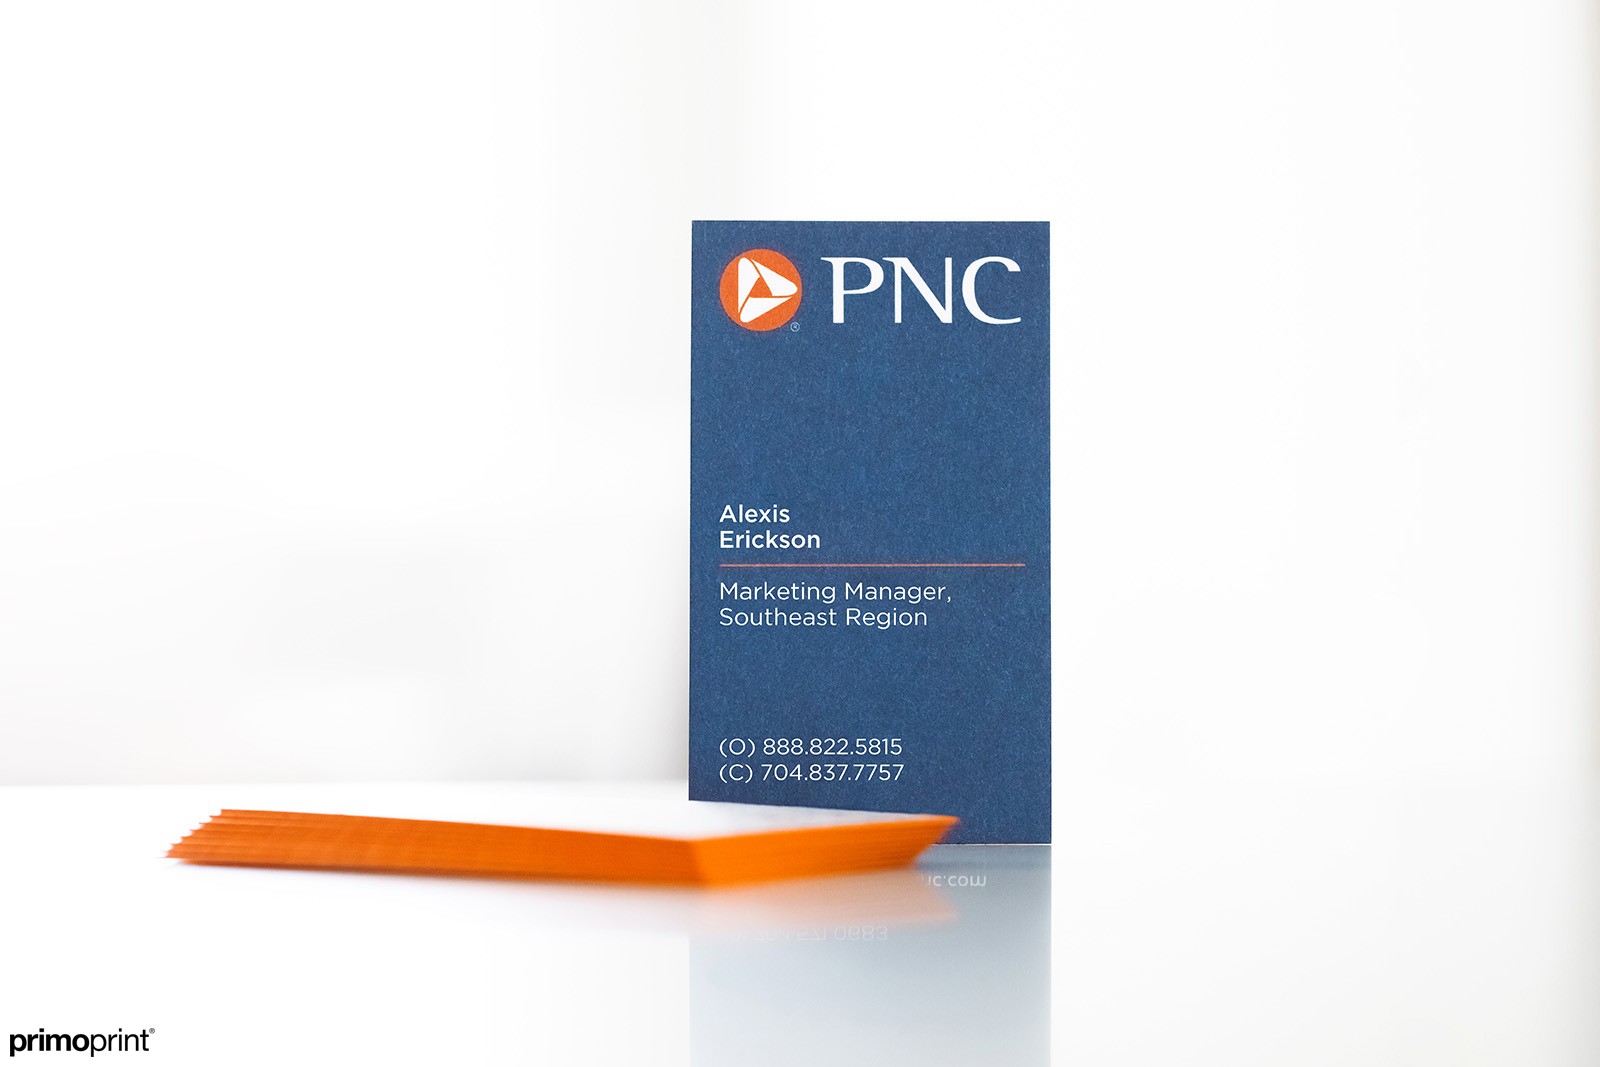 Ultra thick 32PT orange painted edge business card printed for PNC.